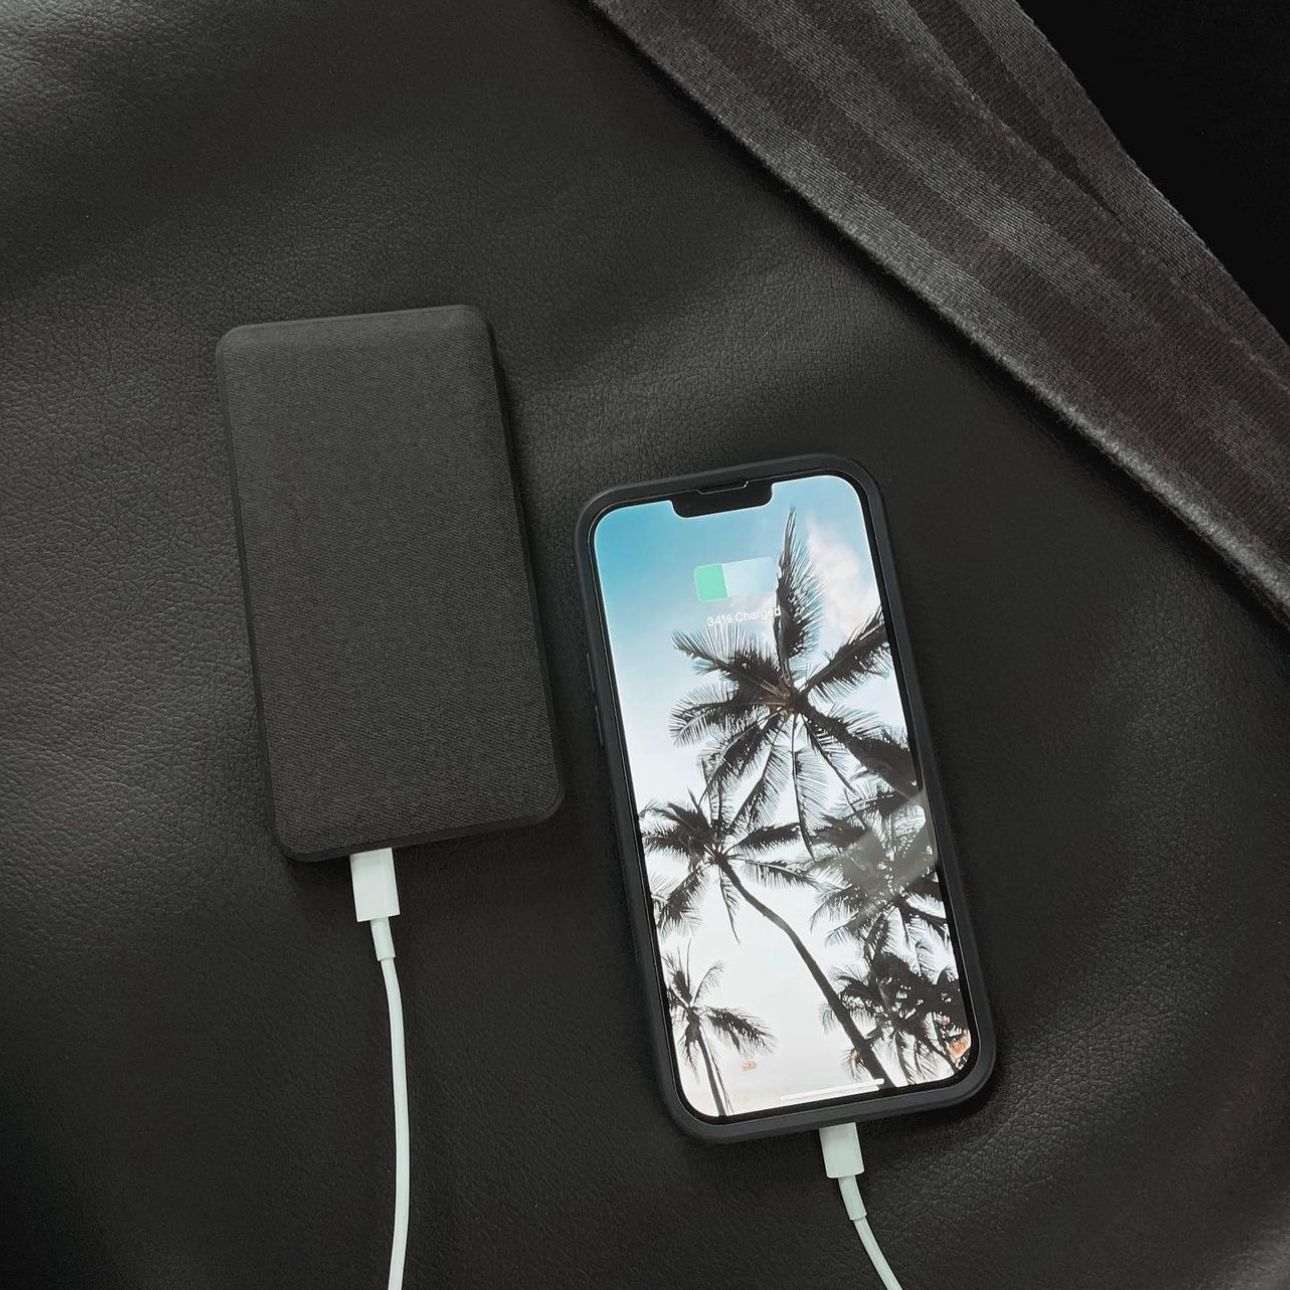 Travel content for Mophie battery bank